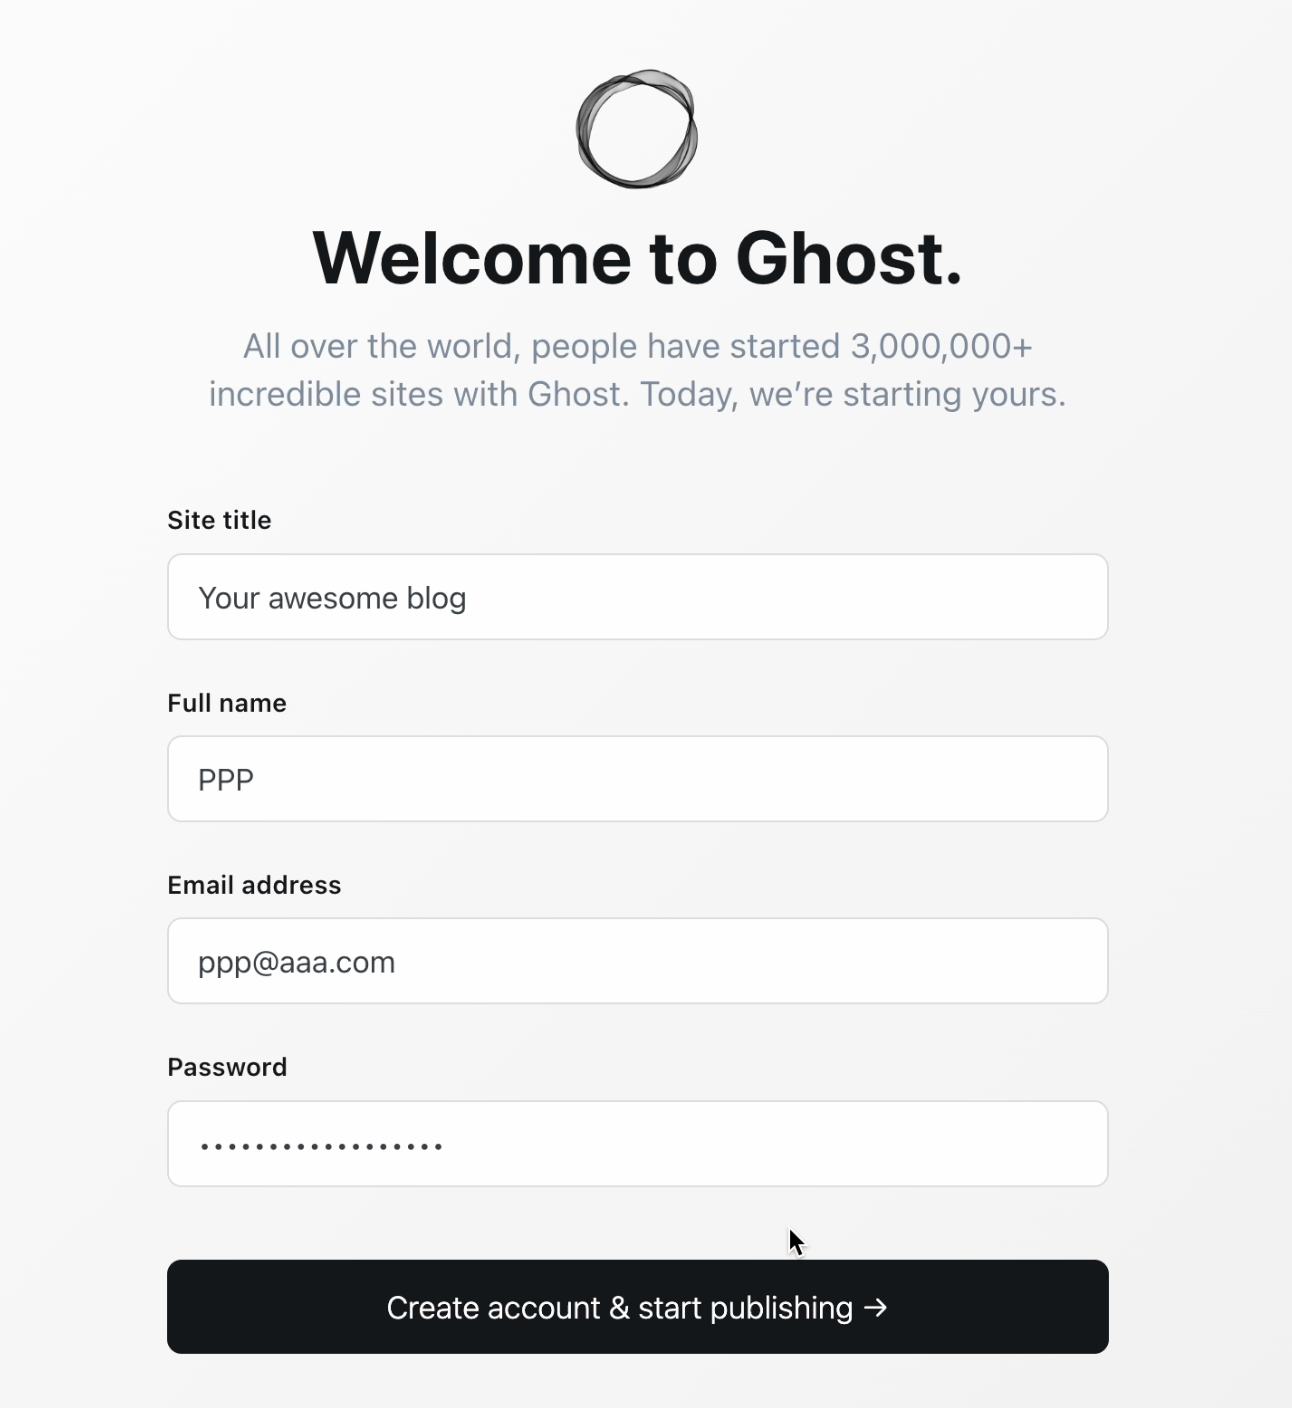 Ghost administrator configuration interface